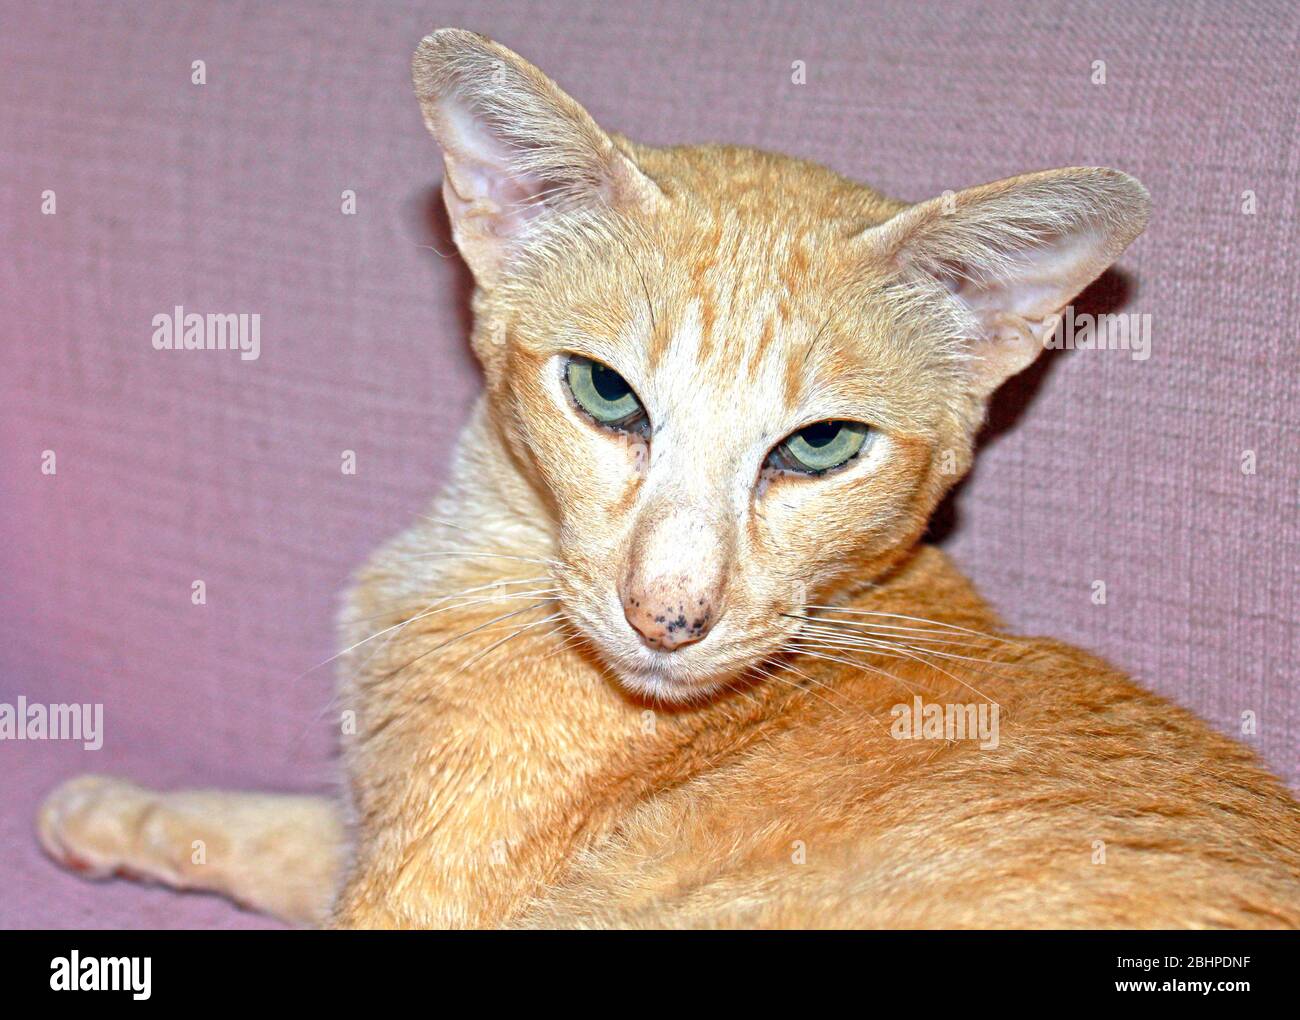 Orinetal?Siamese red spotted tabby cat Stock Photo